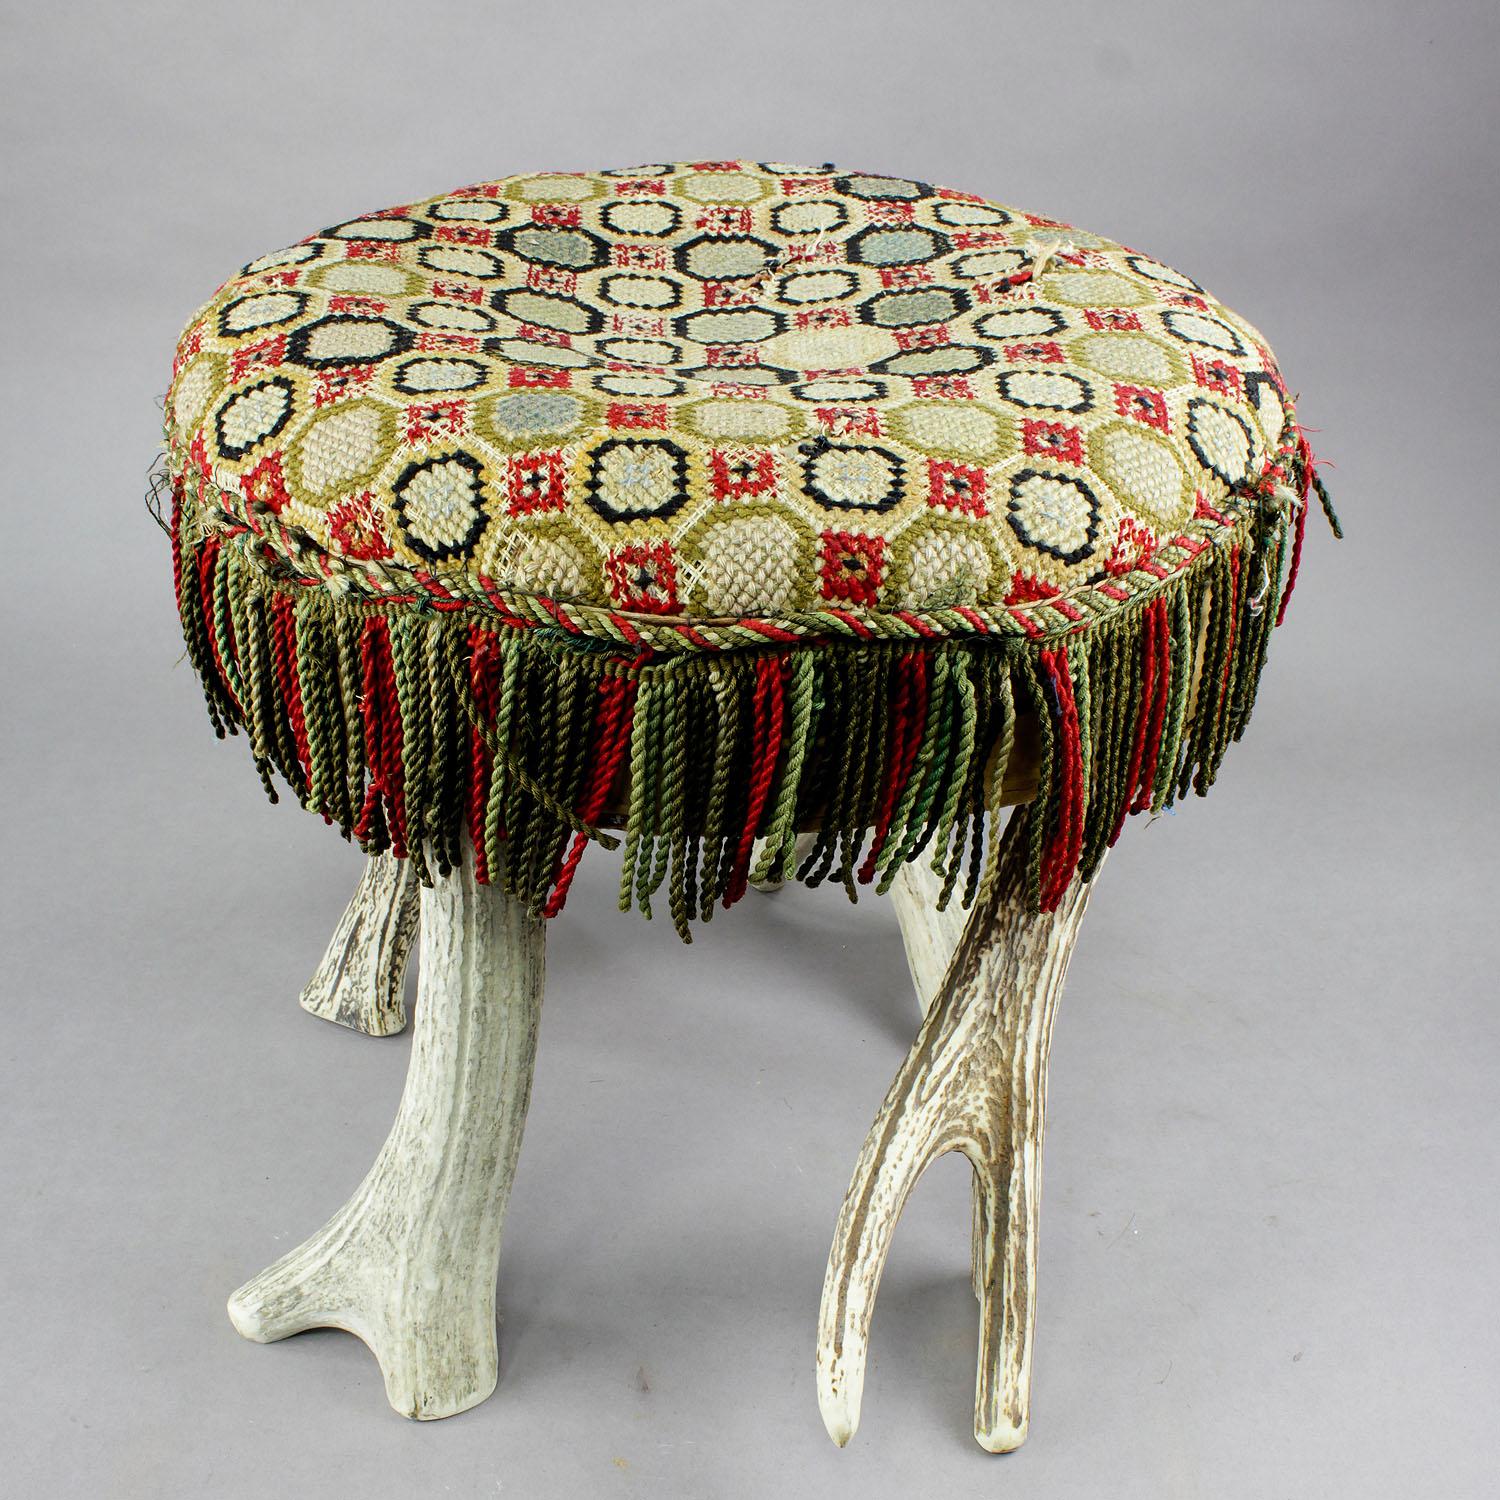 An antique antler stool with stag antlers as legs, seat with handwoven canvas. germany, Black Forest, circa 1900

Measures: Height 17.32